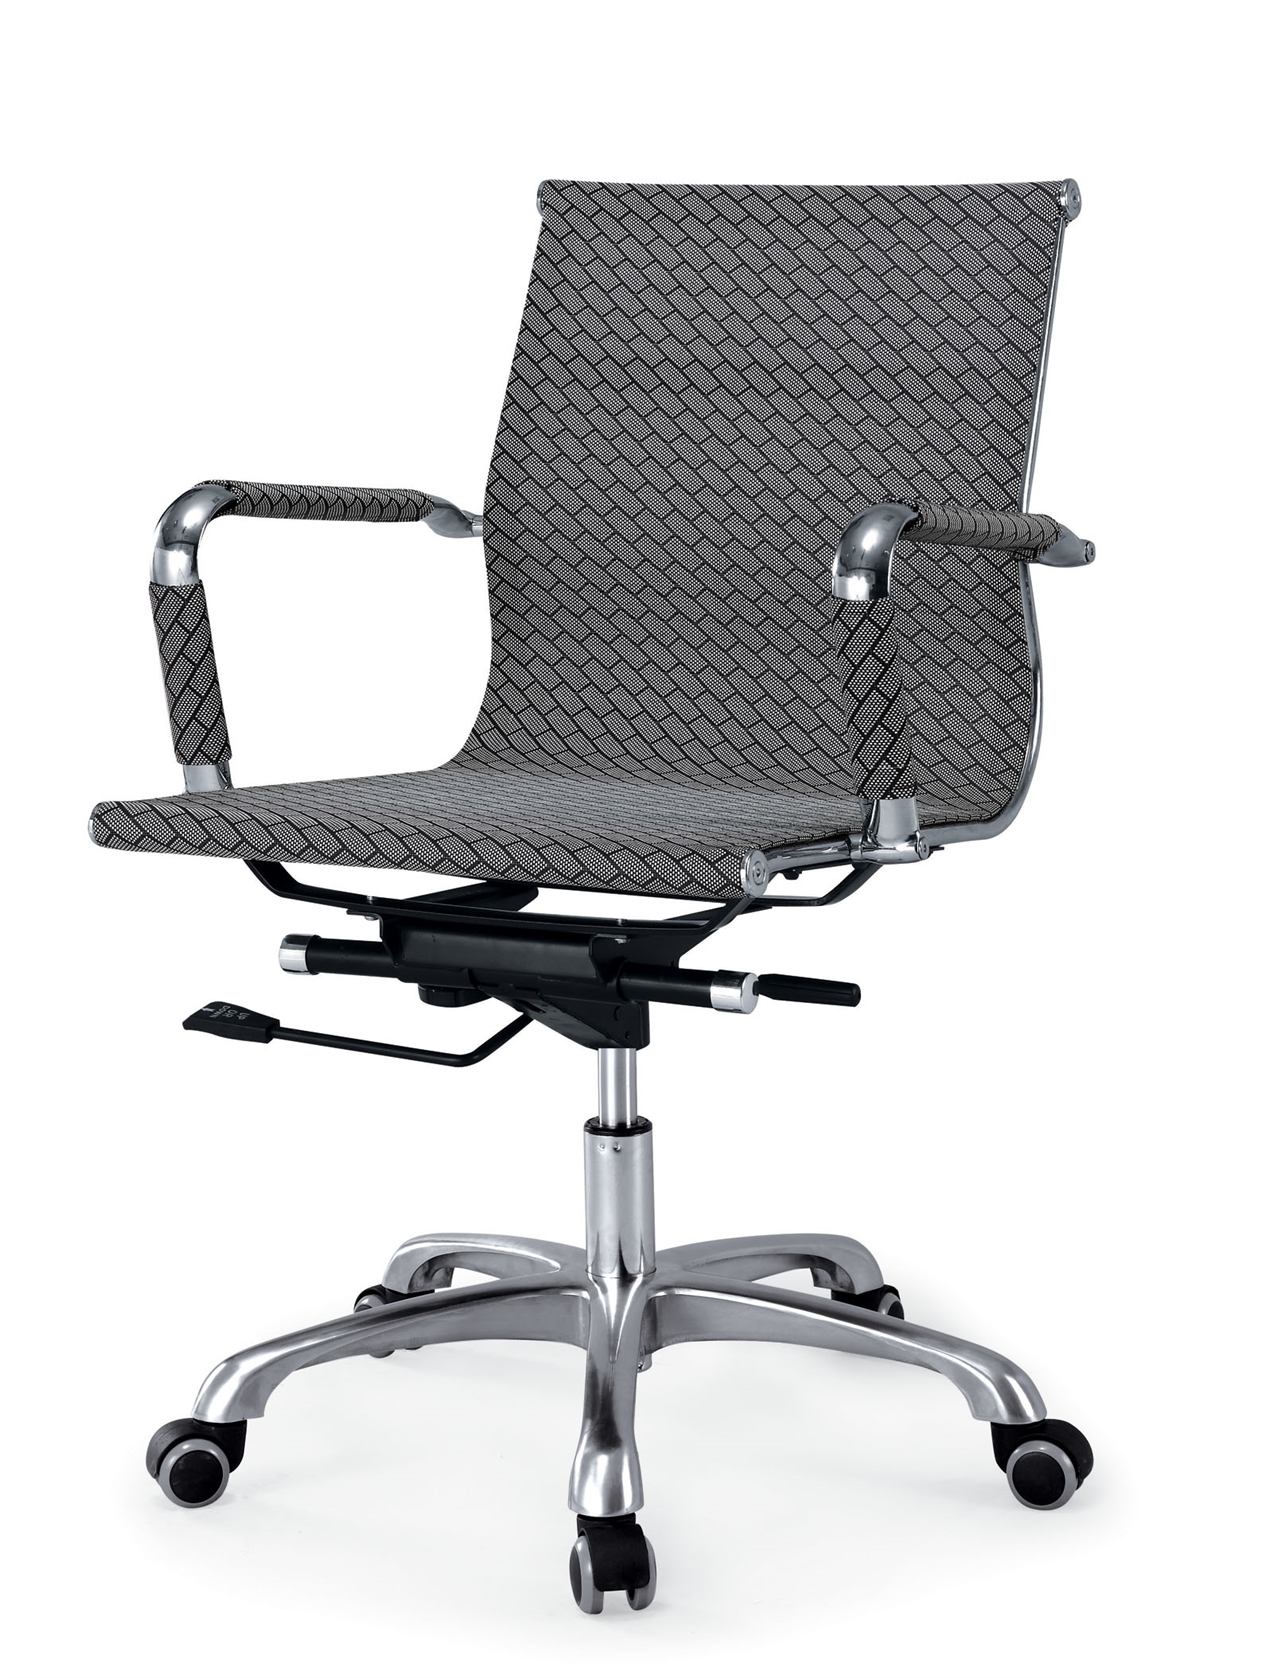 ZHMSOC-01 High Back Swivel Office Chair with Mesh Back and Seat